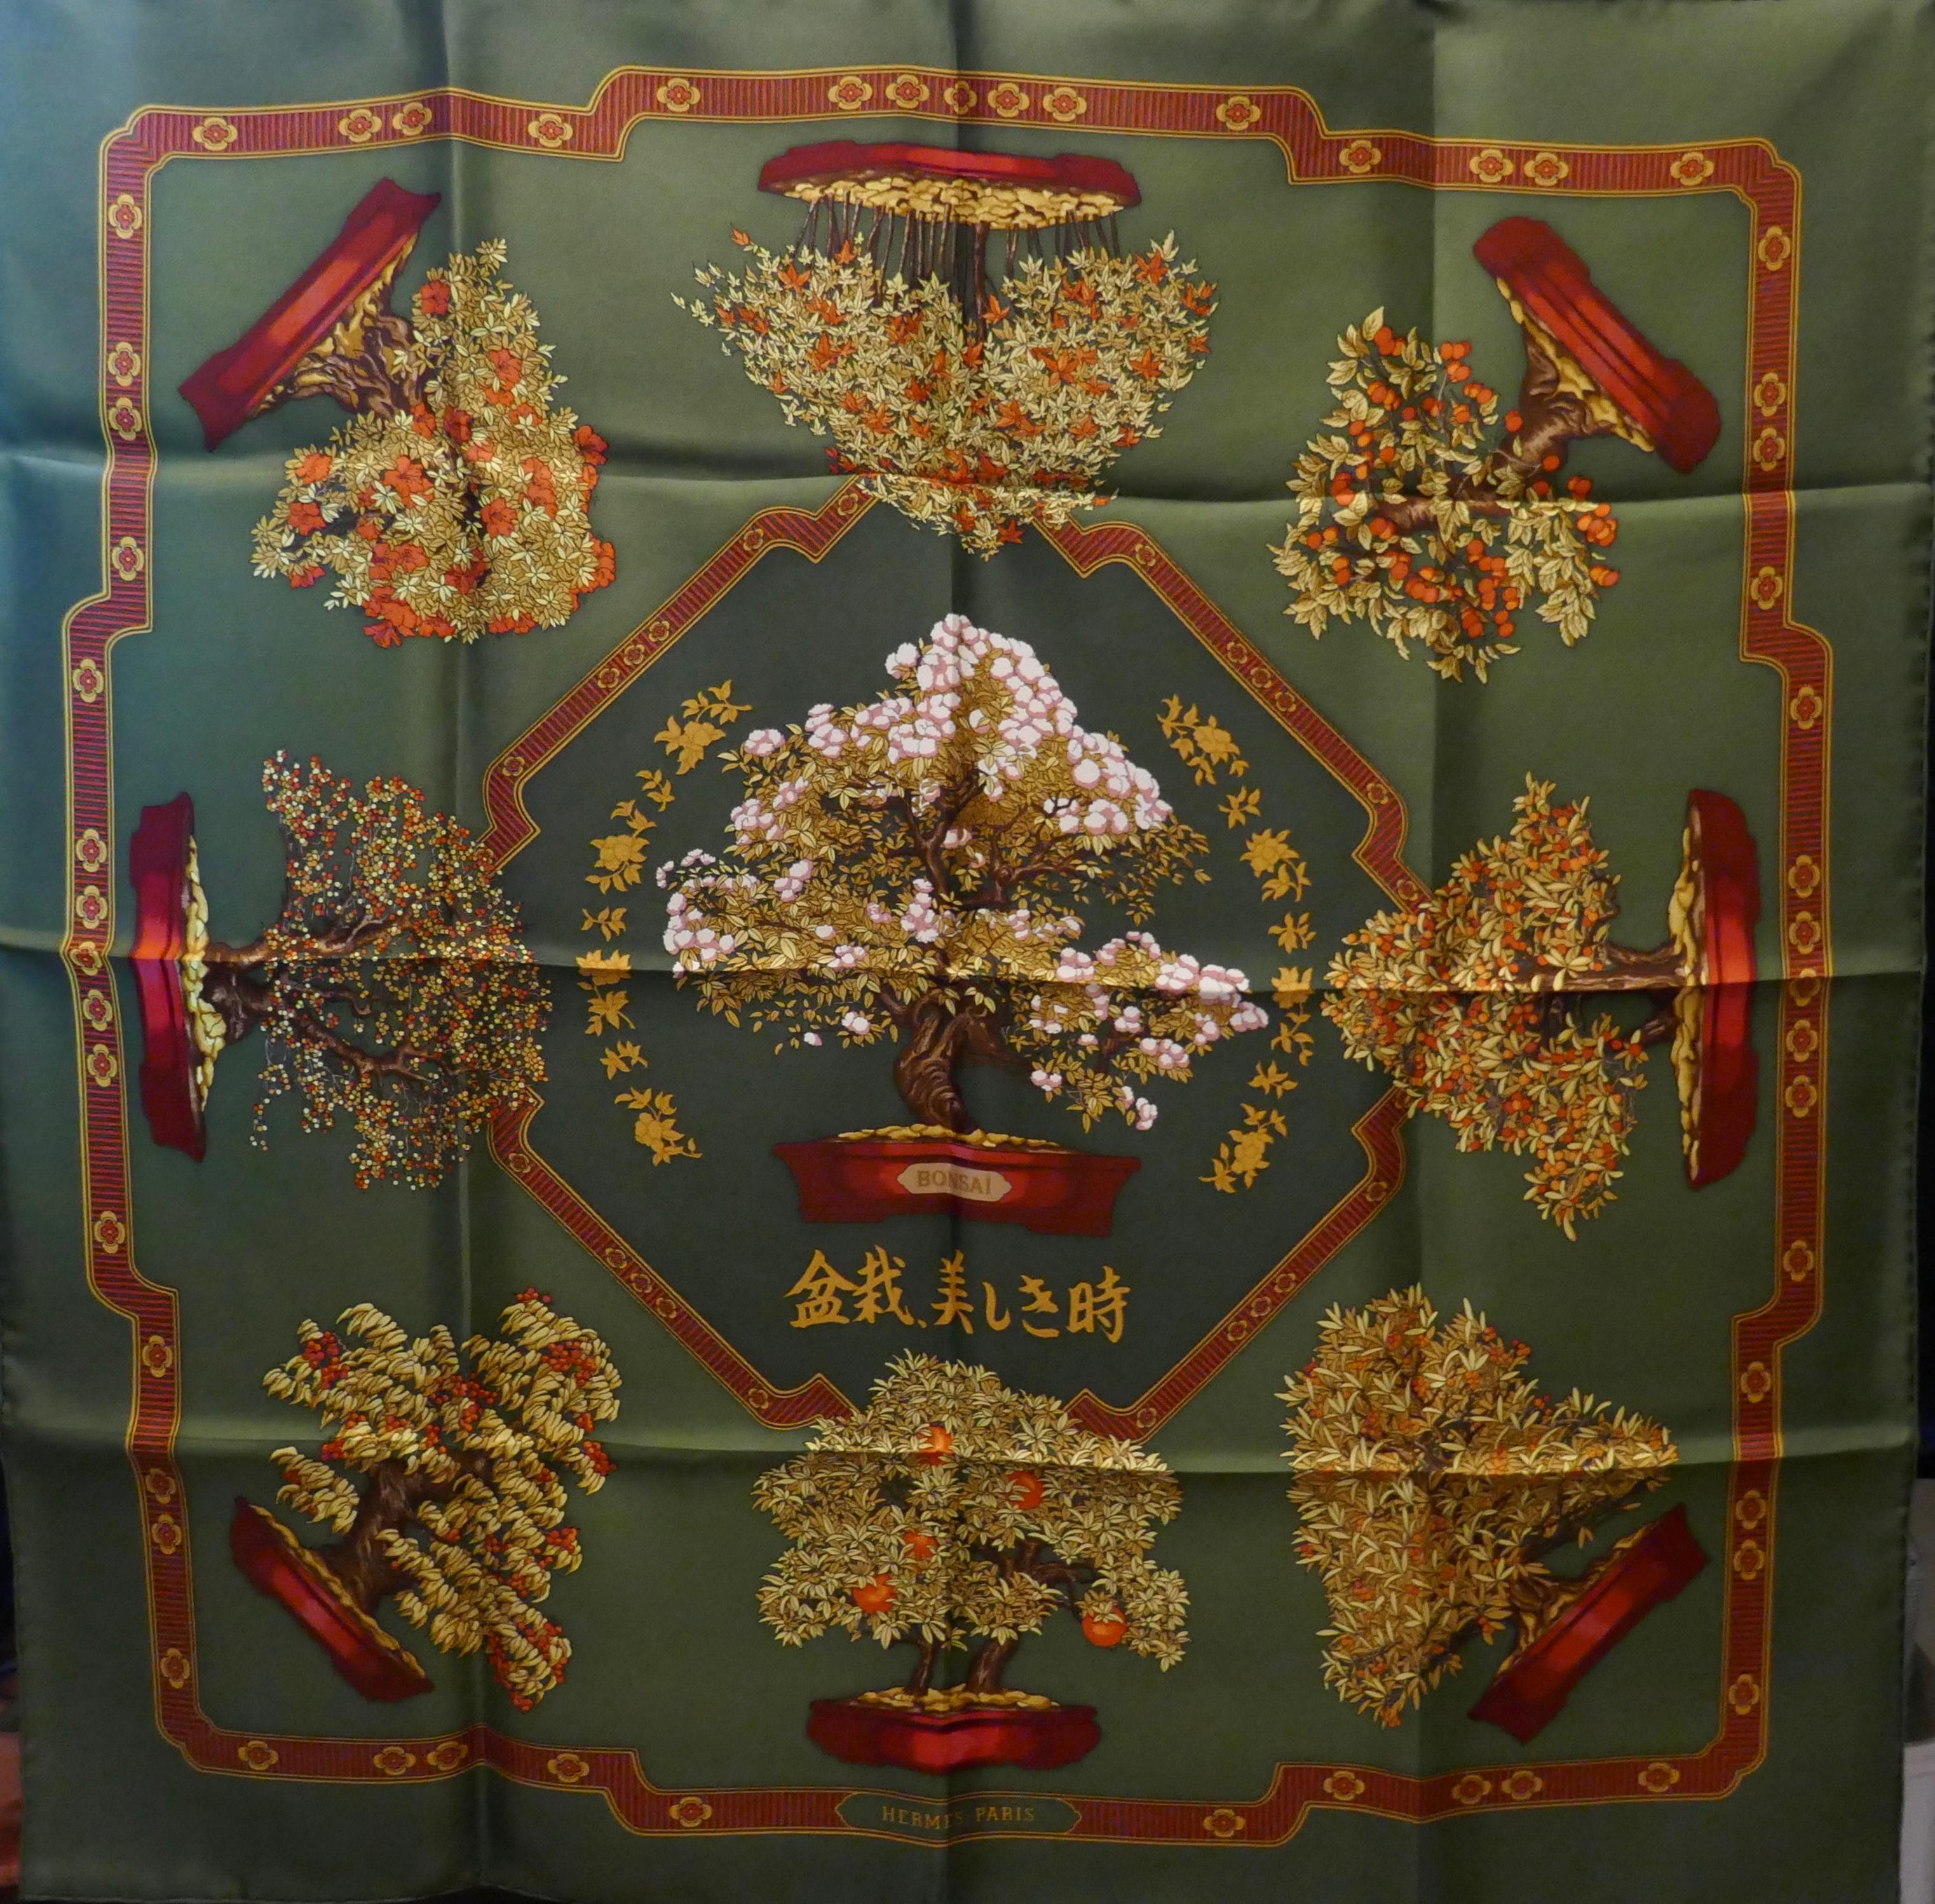 Hermes 100% Silk Scarf “ Les beaux Jours de Bonsai” by  Catherine Baschet 1991 In Excellent Condition For Sale In Chillerton, Isle of Wight